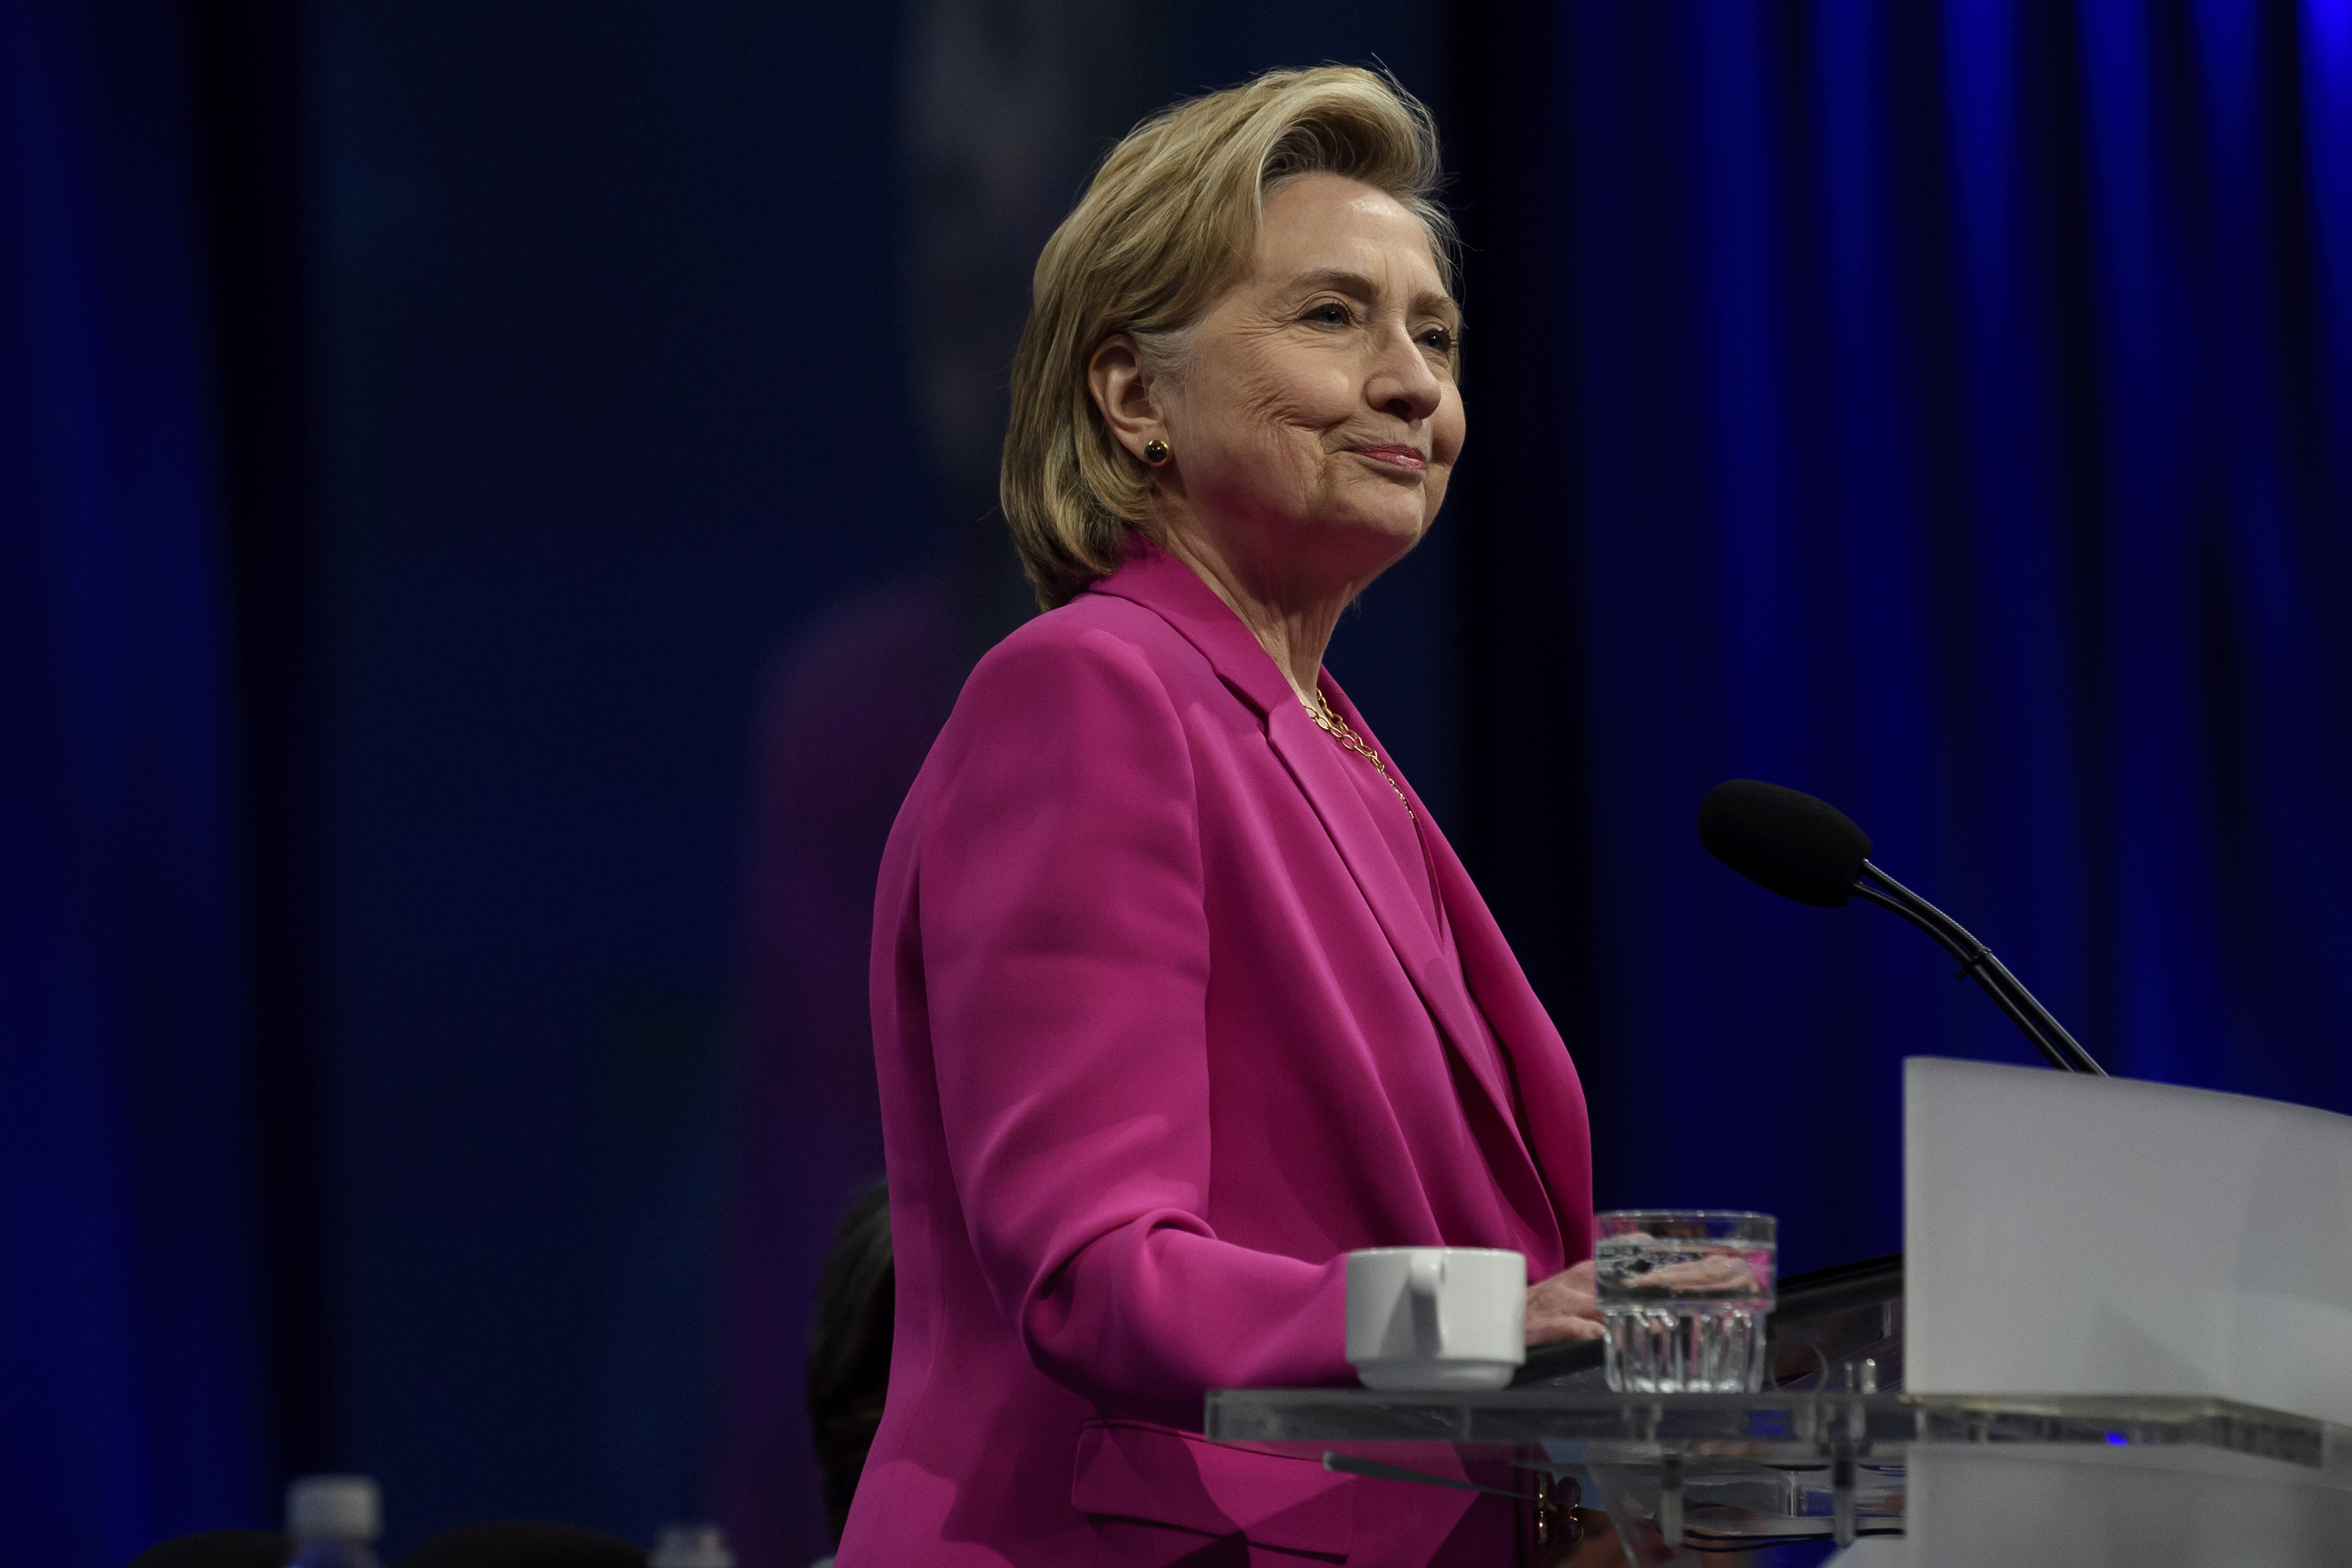 Former Secretary of State Hillary Clinton speaks to the audience at the annual convention of the American Federation of Teachers, in Pittsburgh, Penn. on July 13, 2018. (Jeff Swensen—Getty Images)